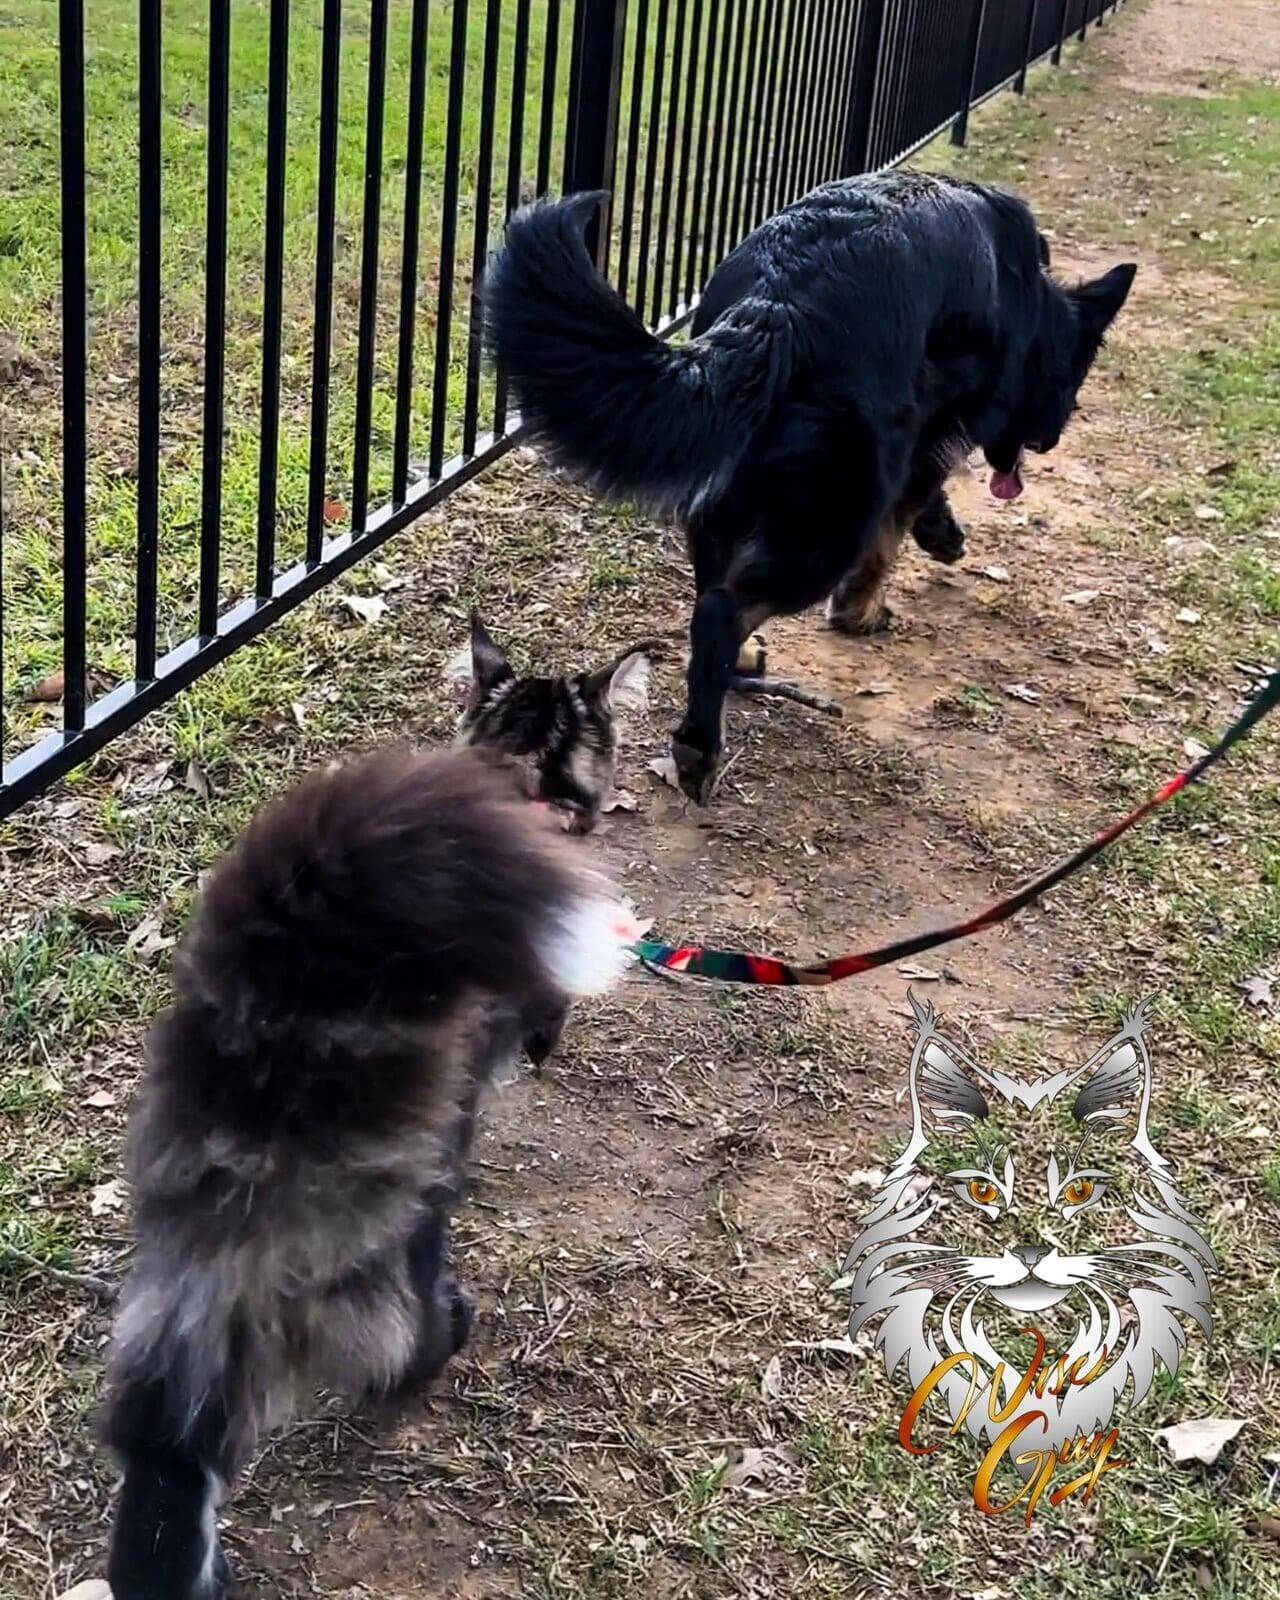 A dog and a cat on a leash walking together near a fence, with a colorful illustrated cat face at the bottom of the image.